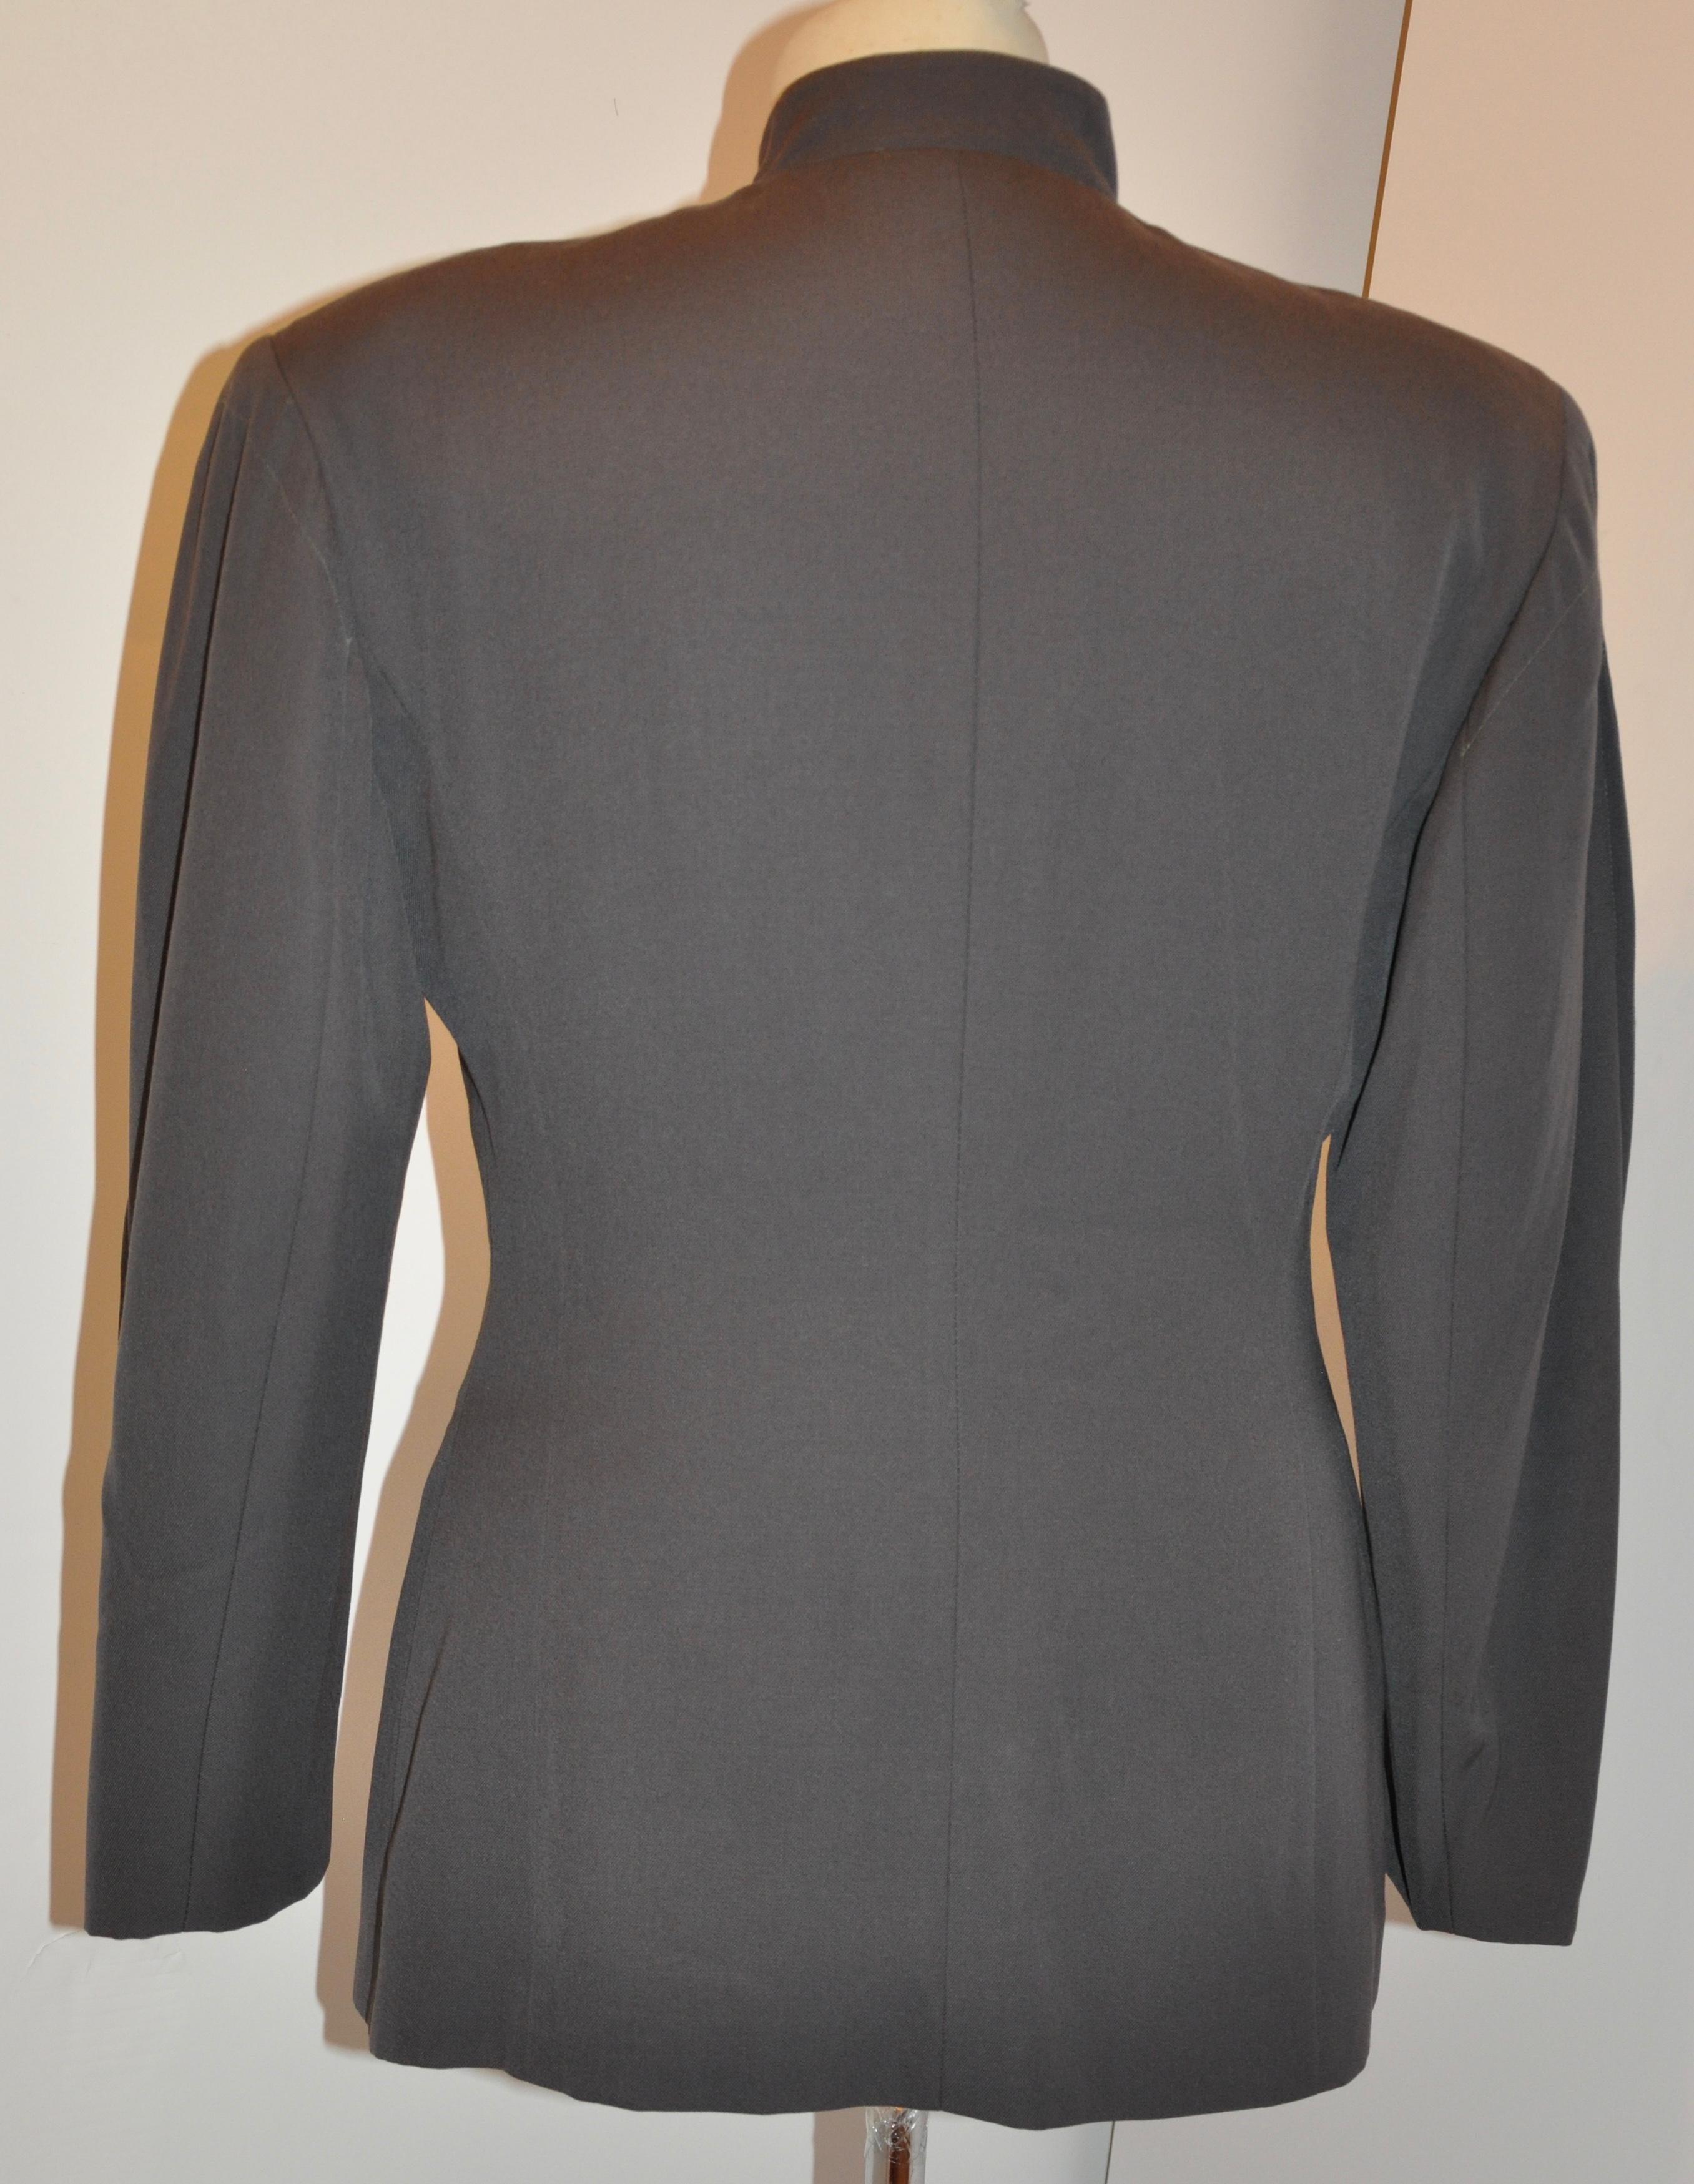 taupe jacket mens